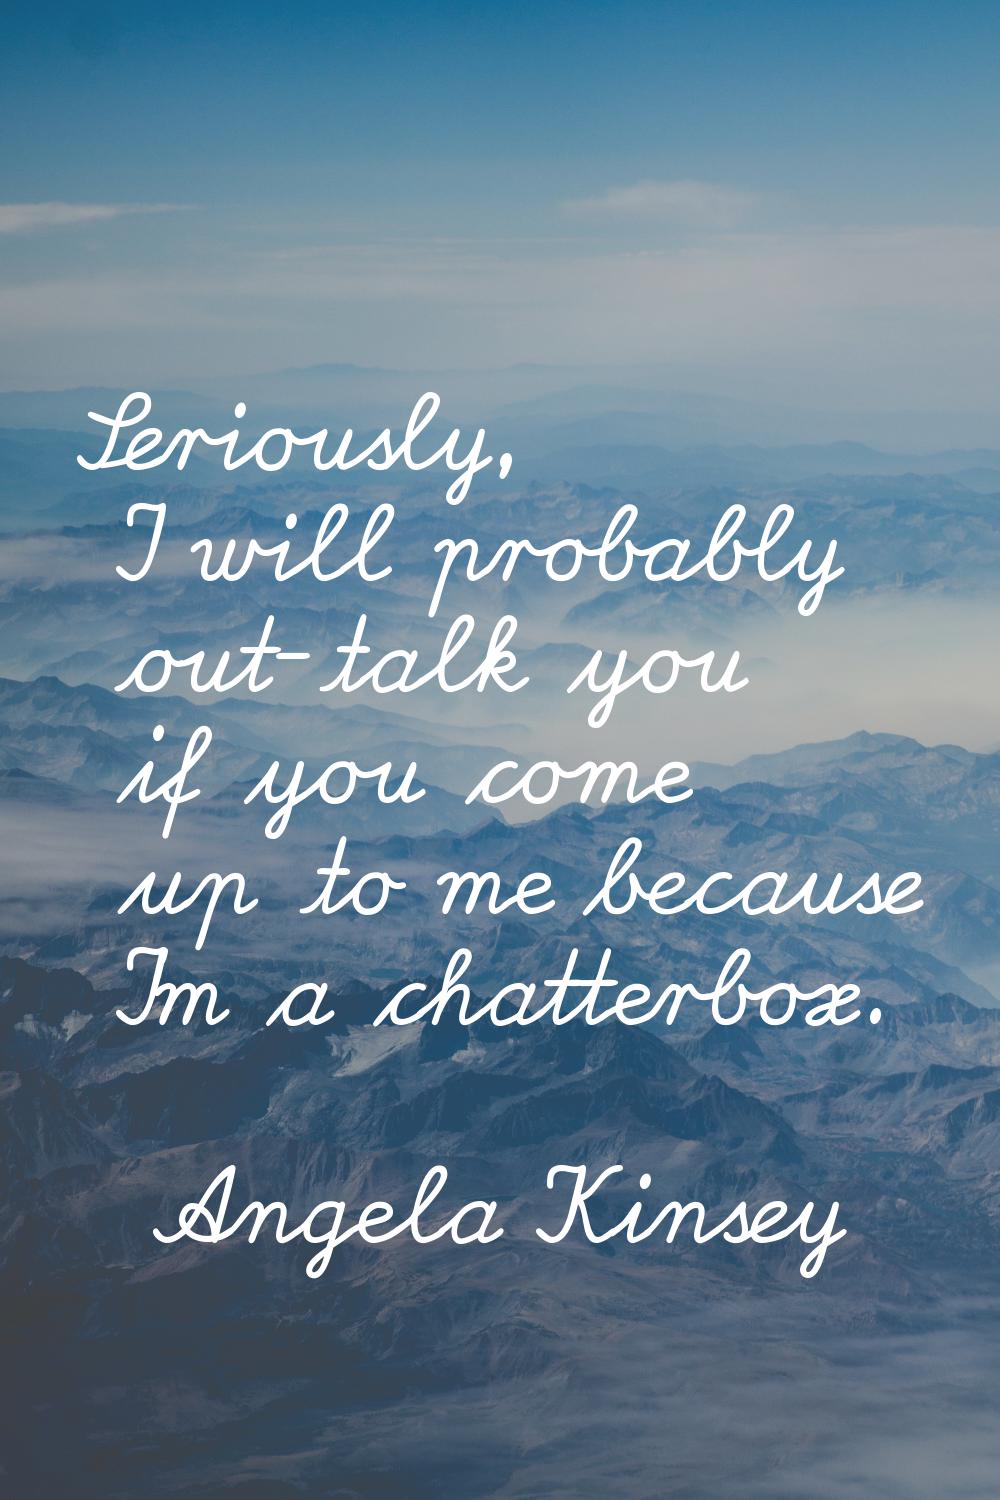 Seriously, I will probably out-talk you if you come up to me because I'm a chatterbox.